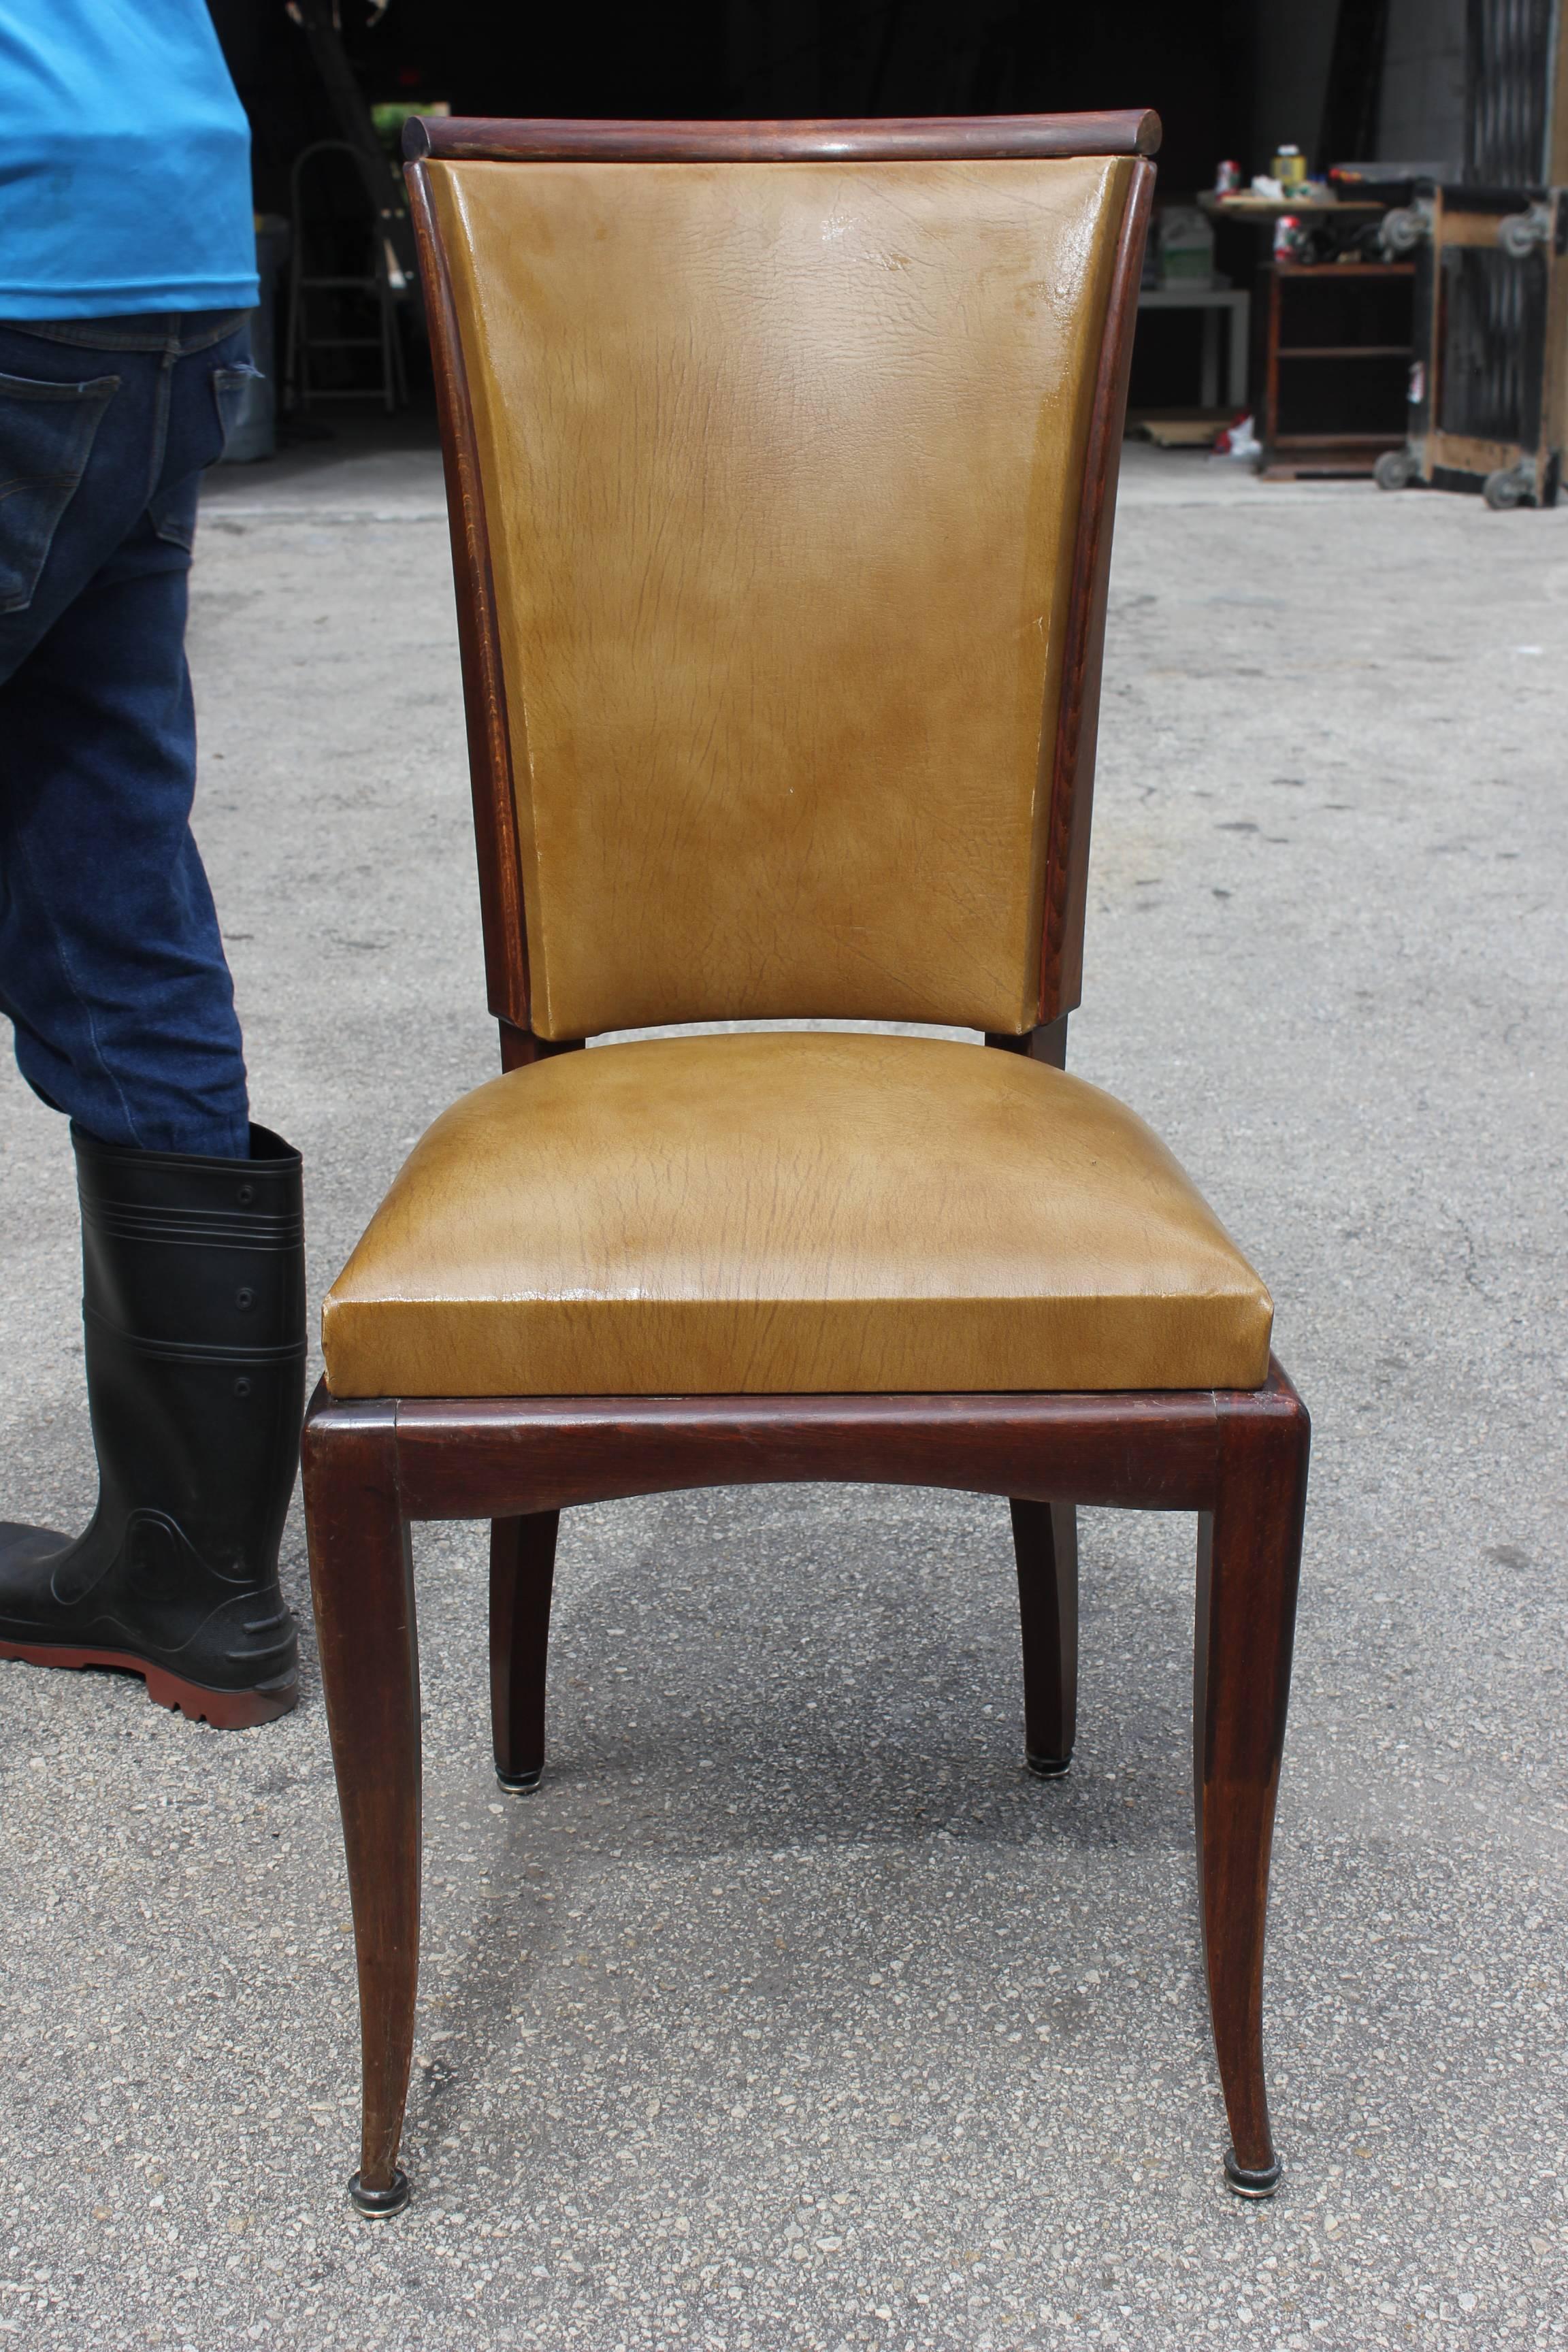 A set of eight French Art Deco walnut dining chairs, circa 1940s. (Reupholstery need to be changed recommended.).